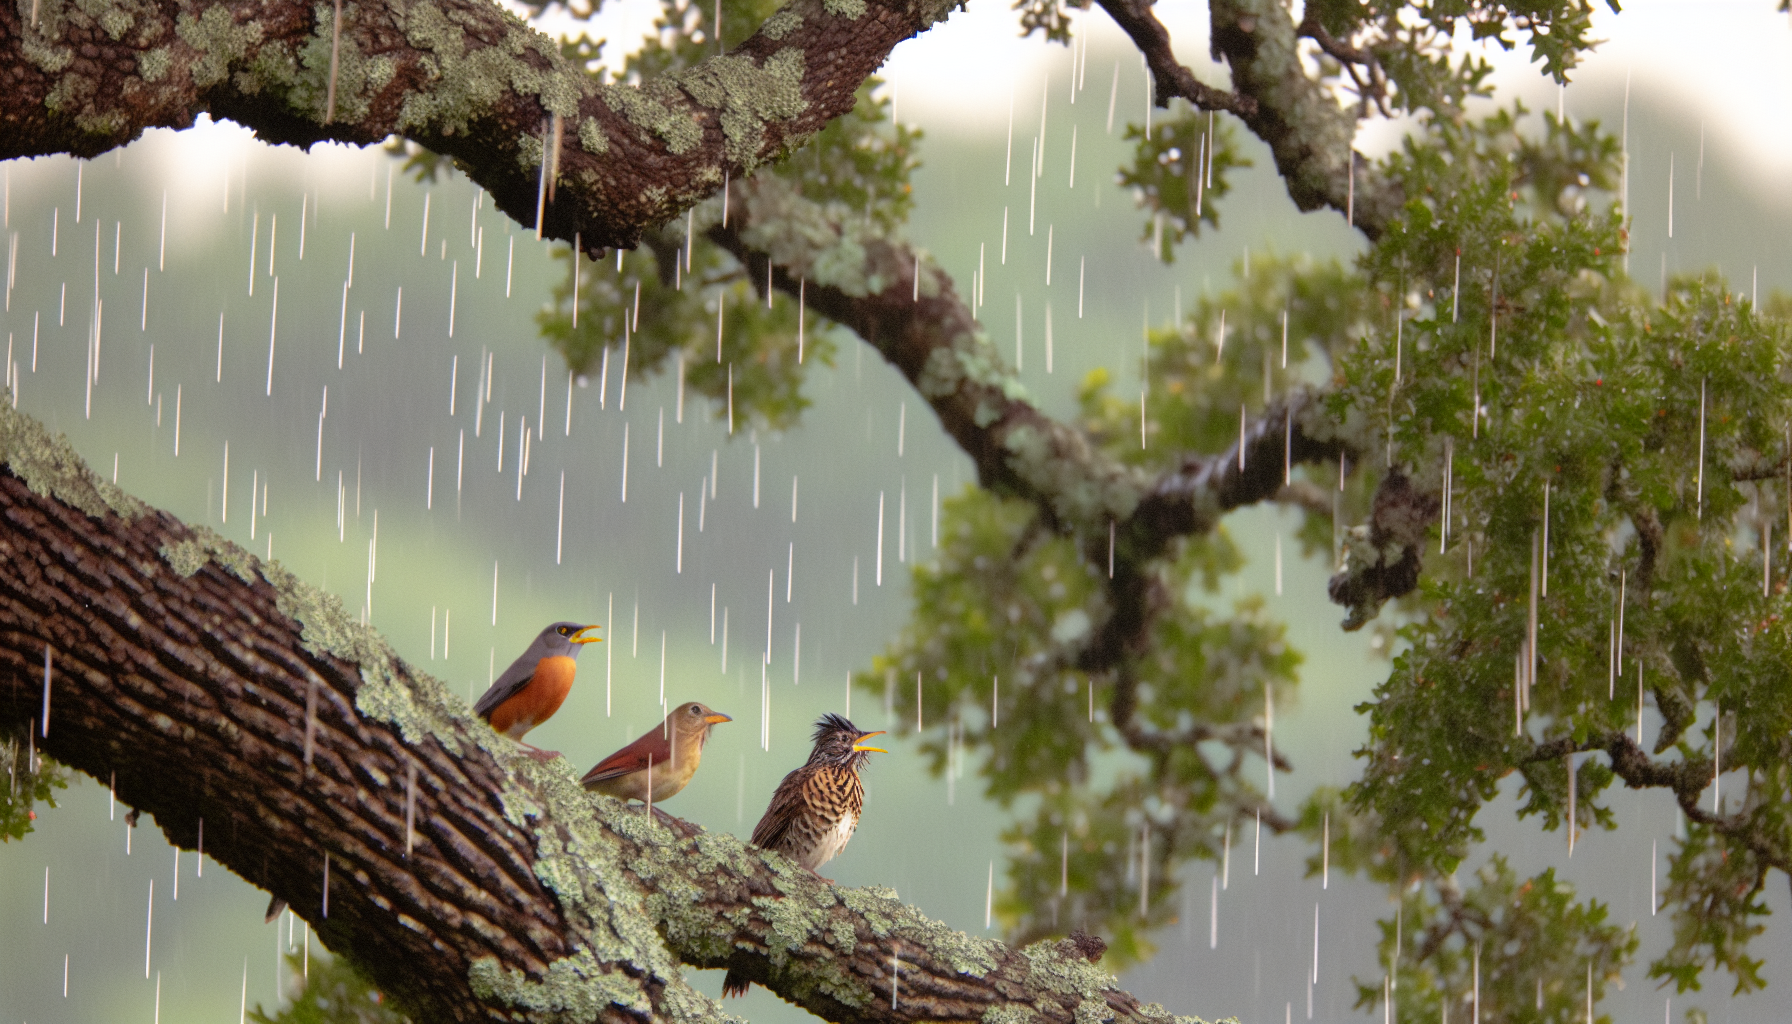 Birds singing in the rain with blurred raindrops in the background